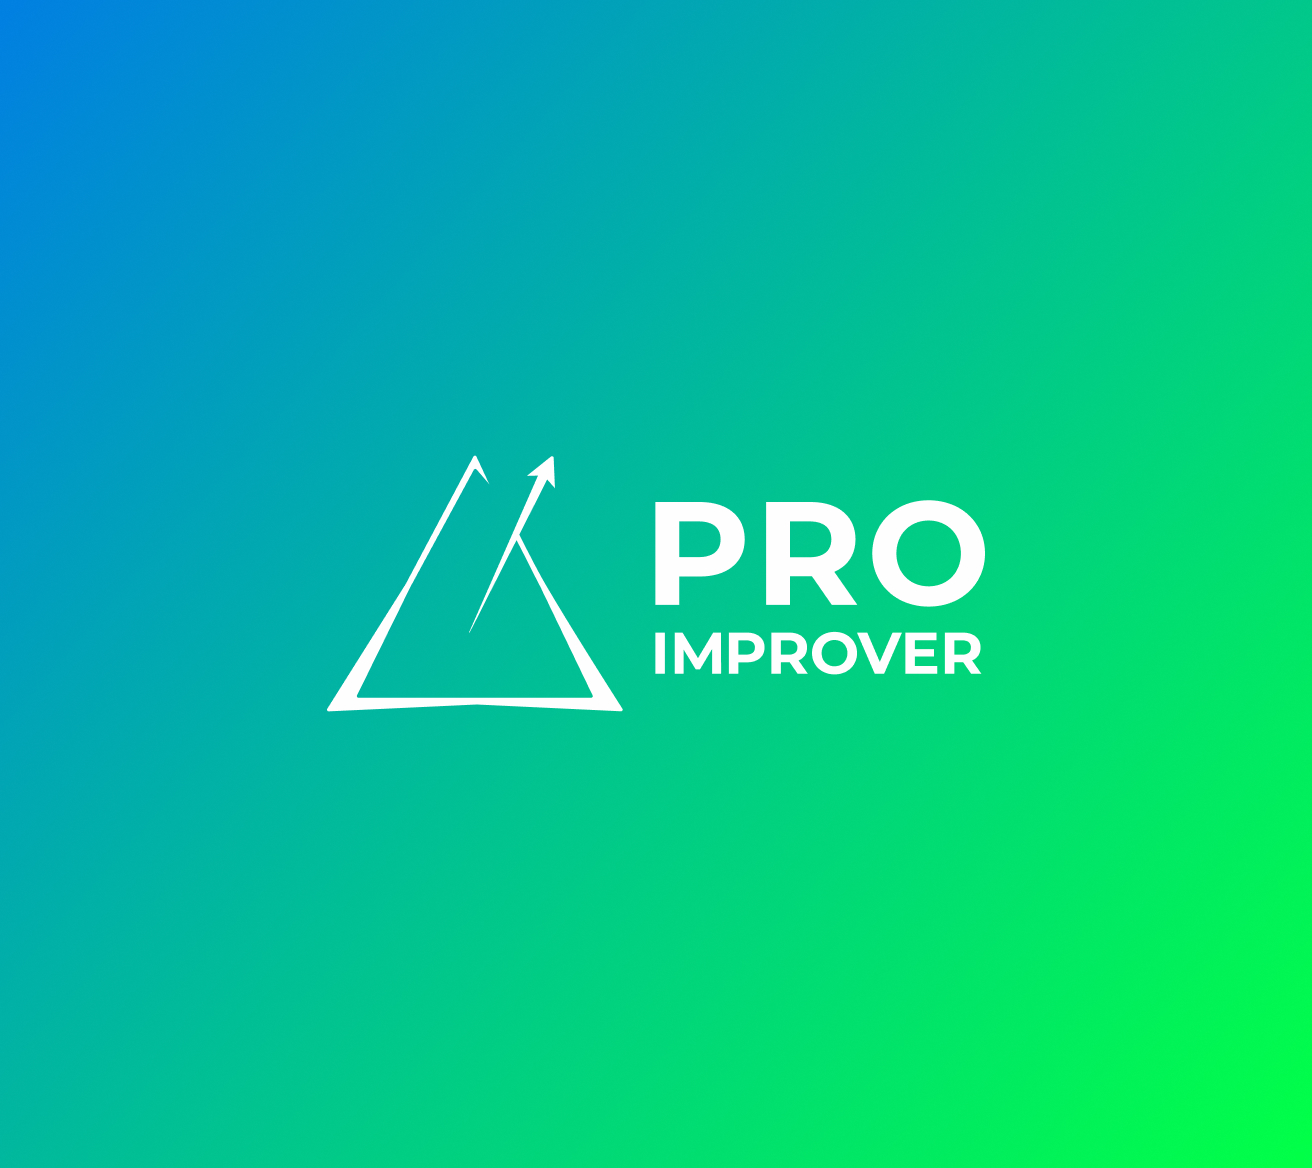 Coming Soon: White label with Proimprover according to the outsourcing model